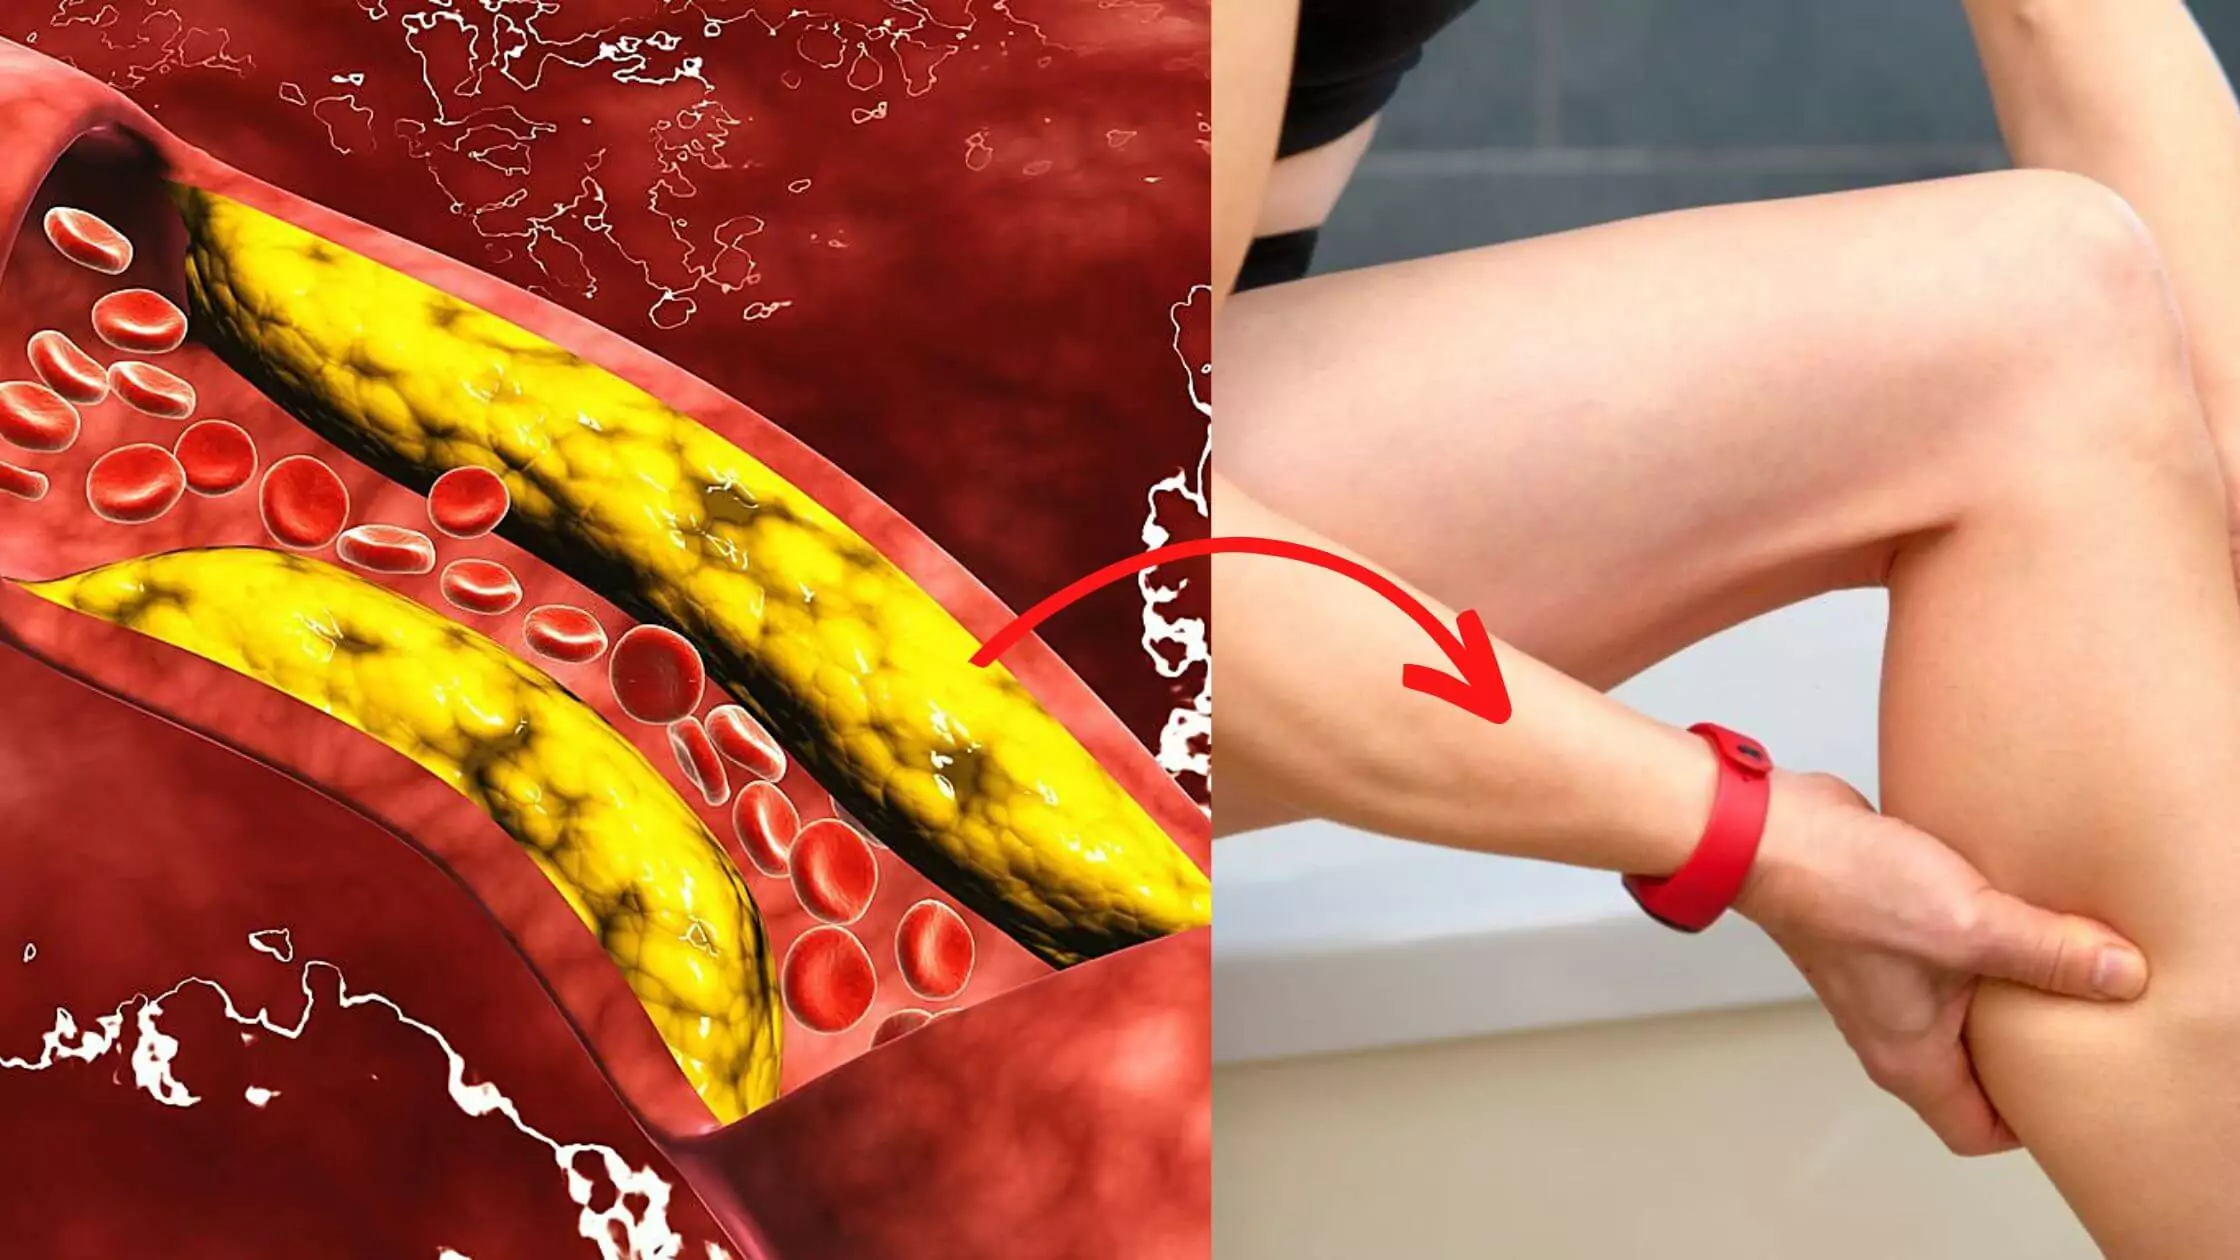 'Charley Horse' Is A Symptom Of Artery Clogging Caused By Cholesterol